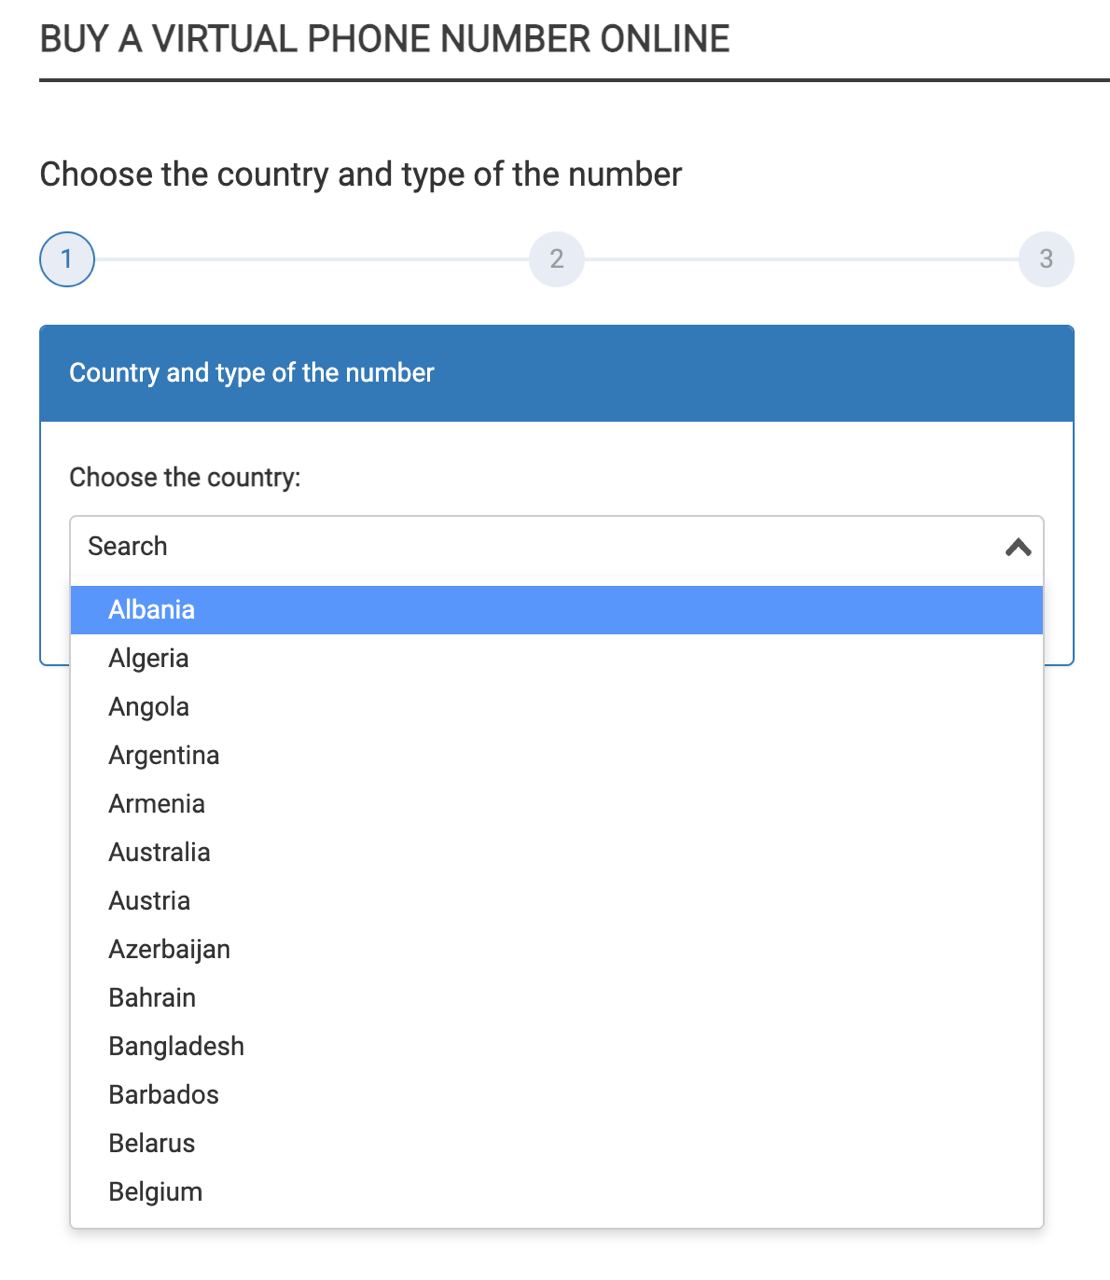 Choose a country